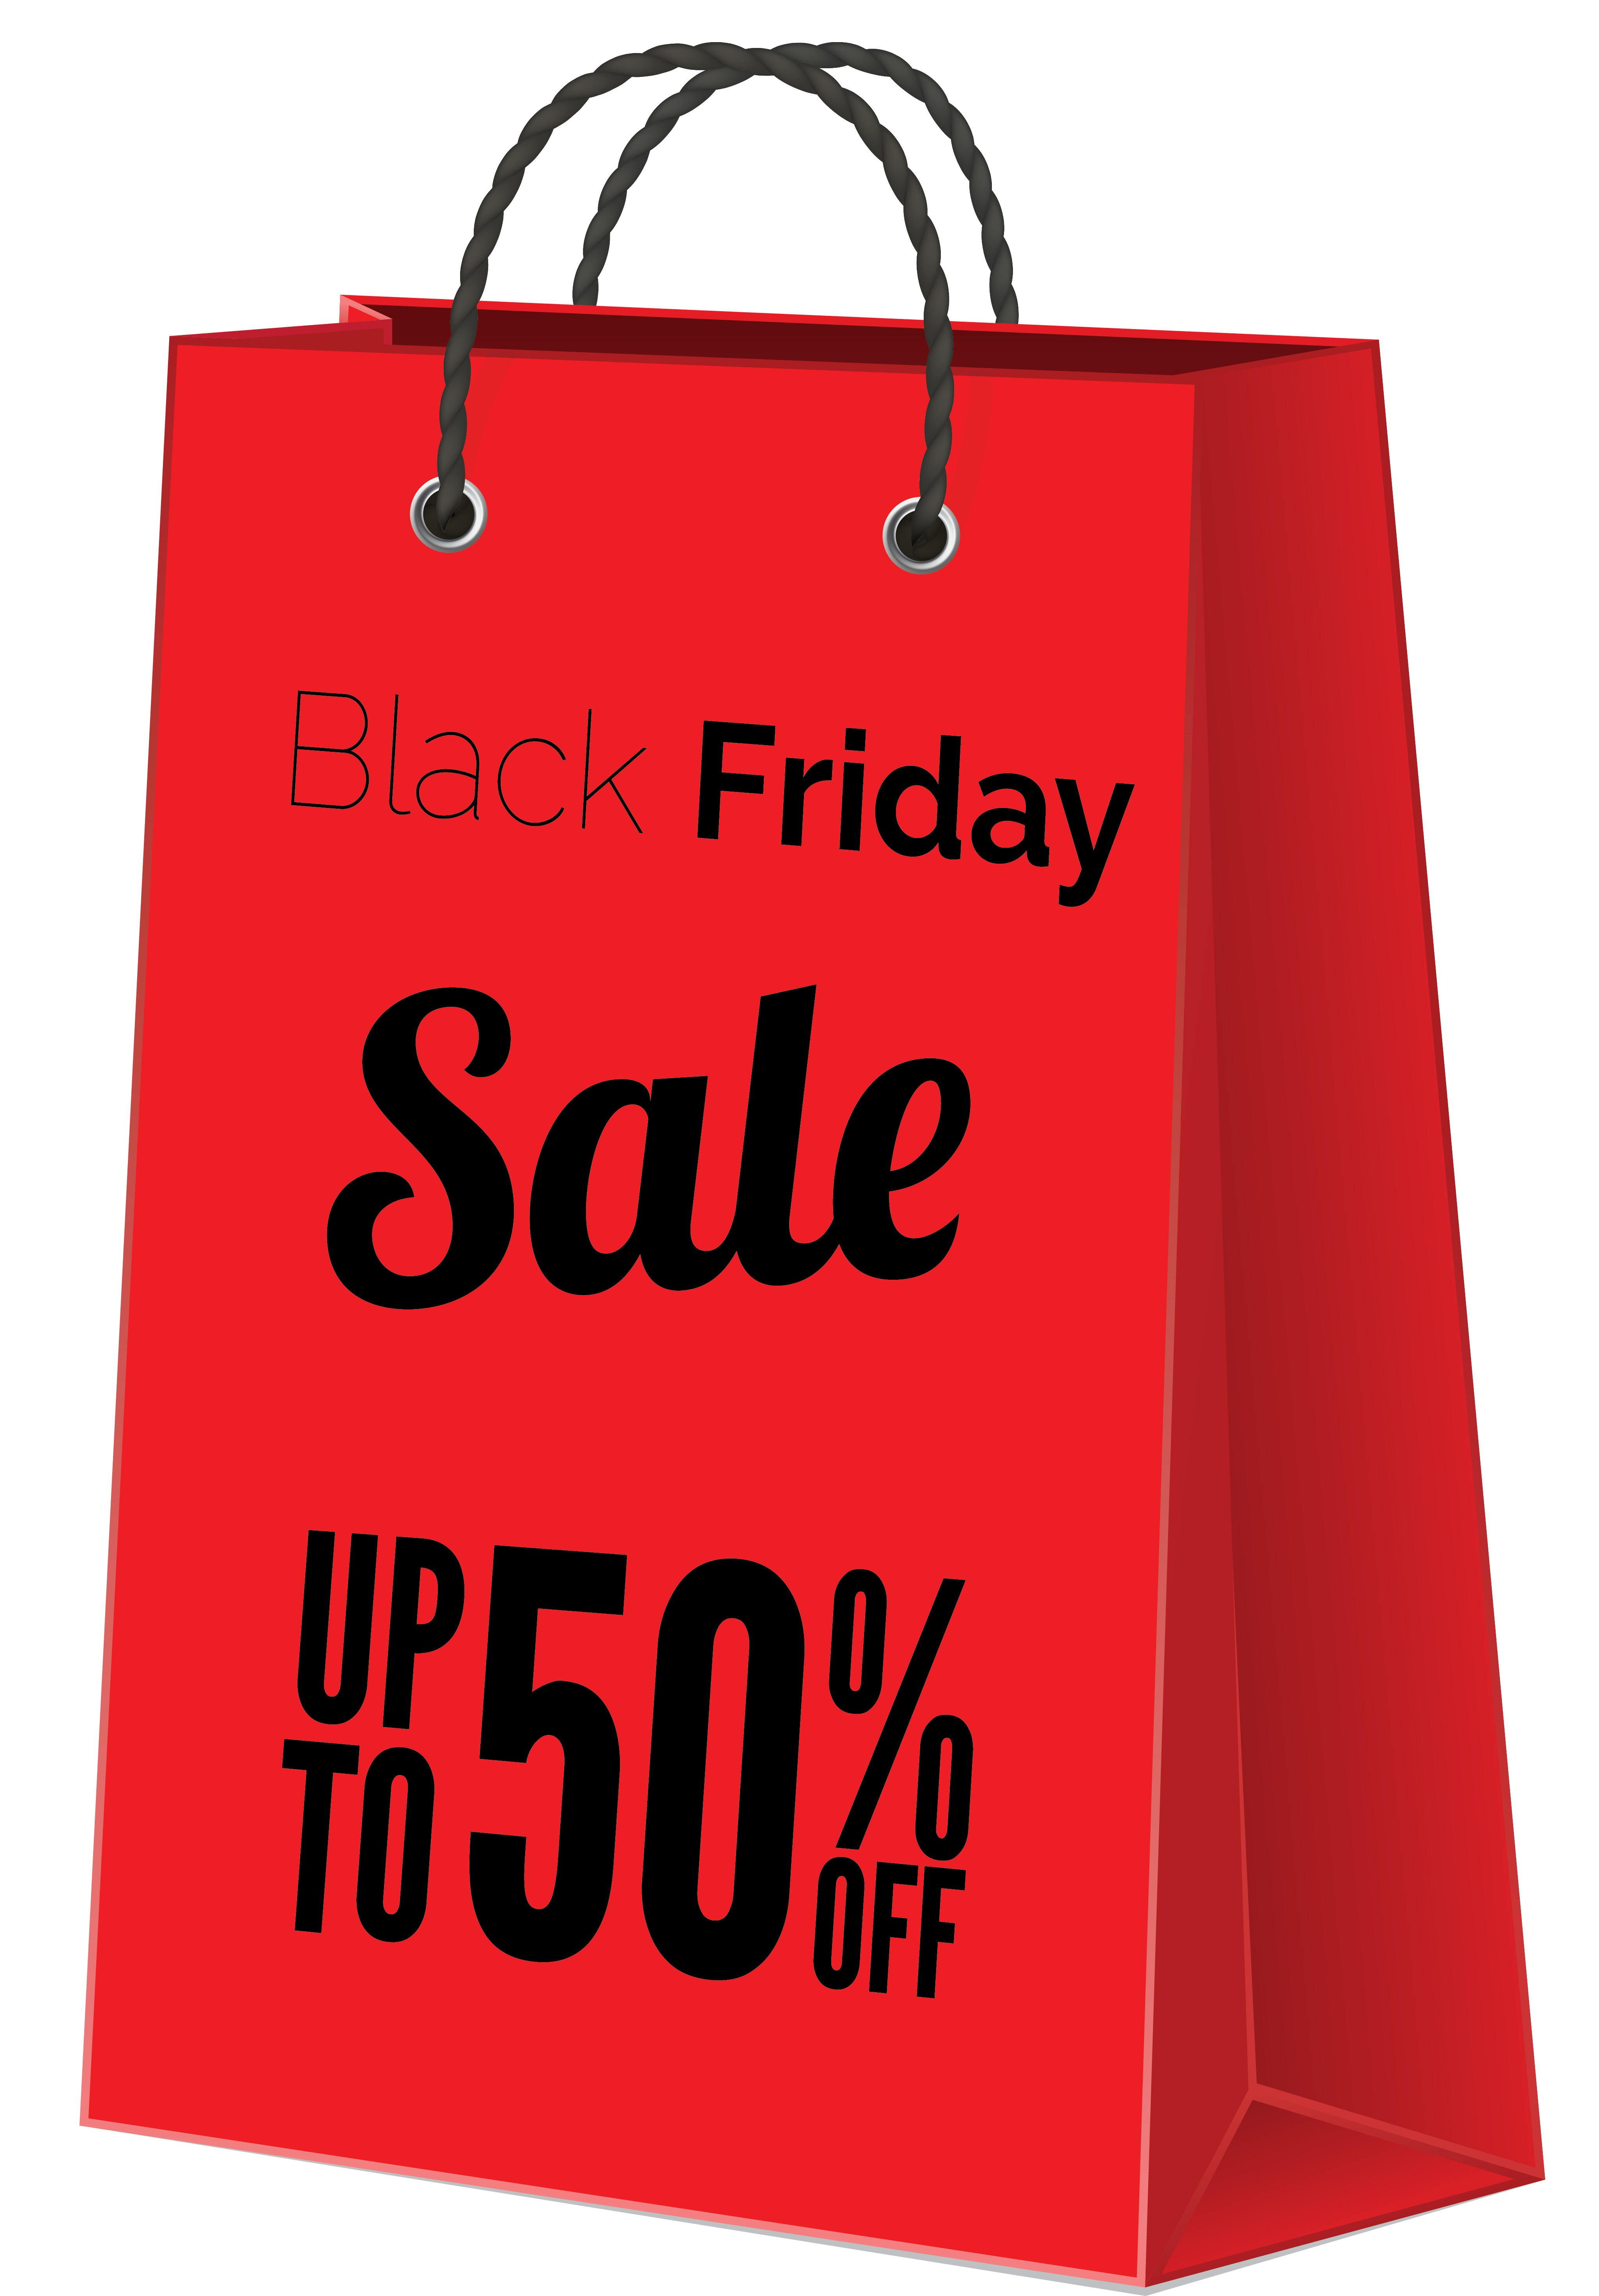 Black Friday Sale Red Bag PNG Clipart Image | Gallery Yopriceville - High-Quality Images and ...